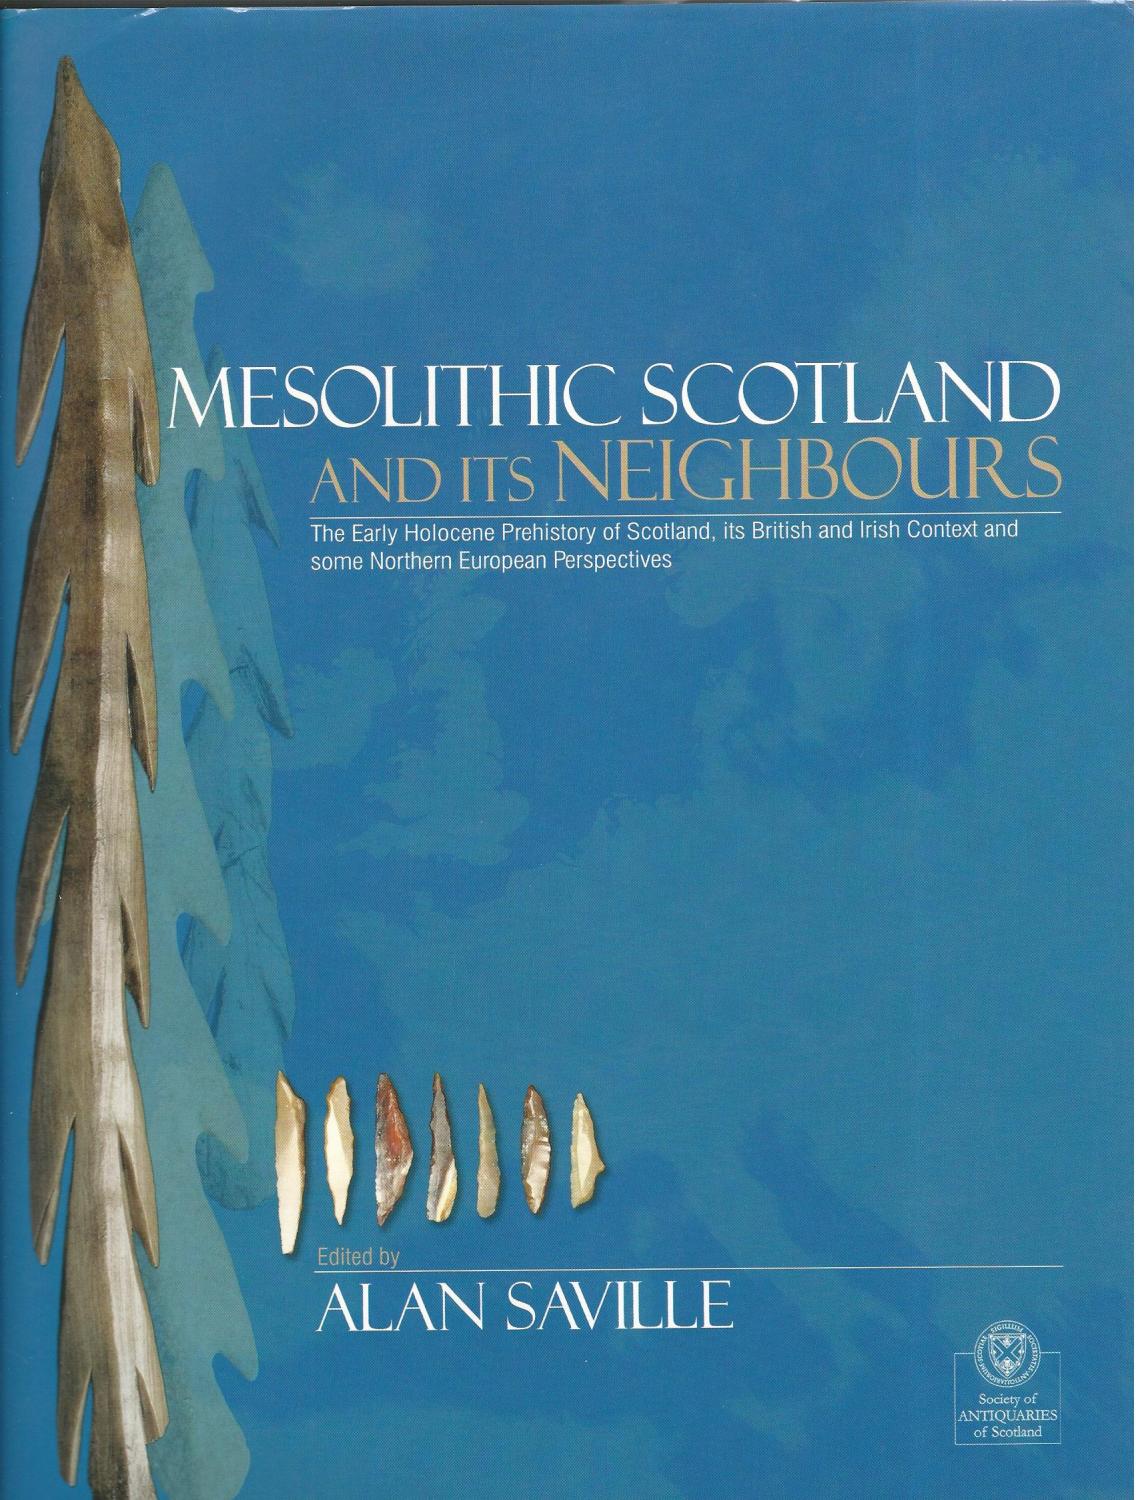 Mesolithic Scotland and Its Neighbours: The Early Holocene Prehistory of Scotland, its British and Irish Context and Some Northern European Perspectives - Saville, Alan